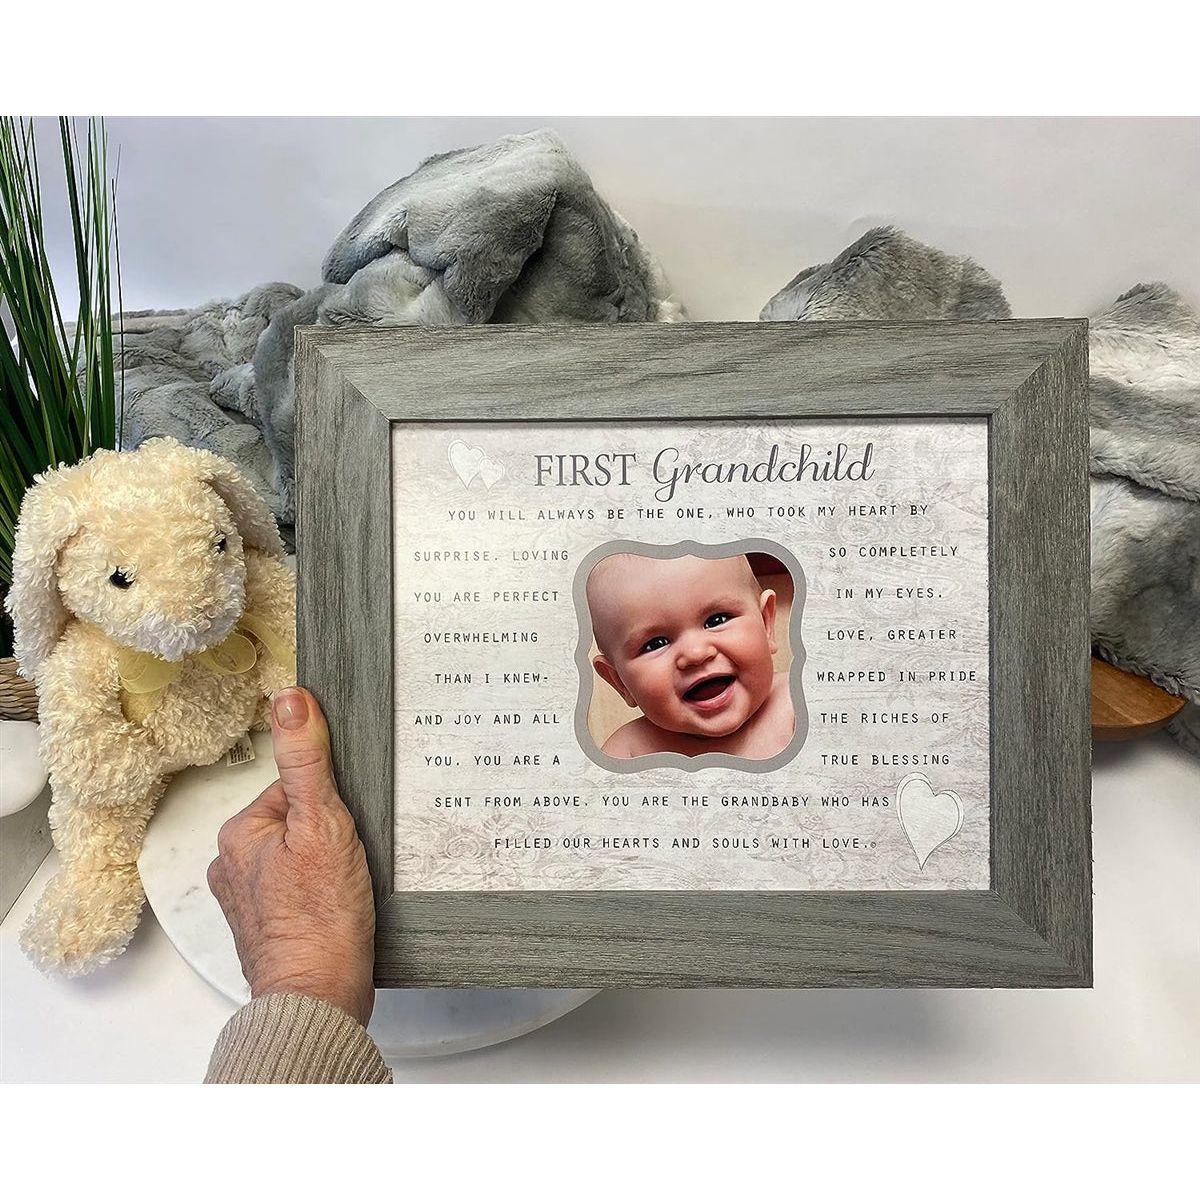 First Grandchild frame being held in a hand.